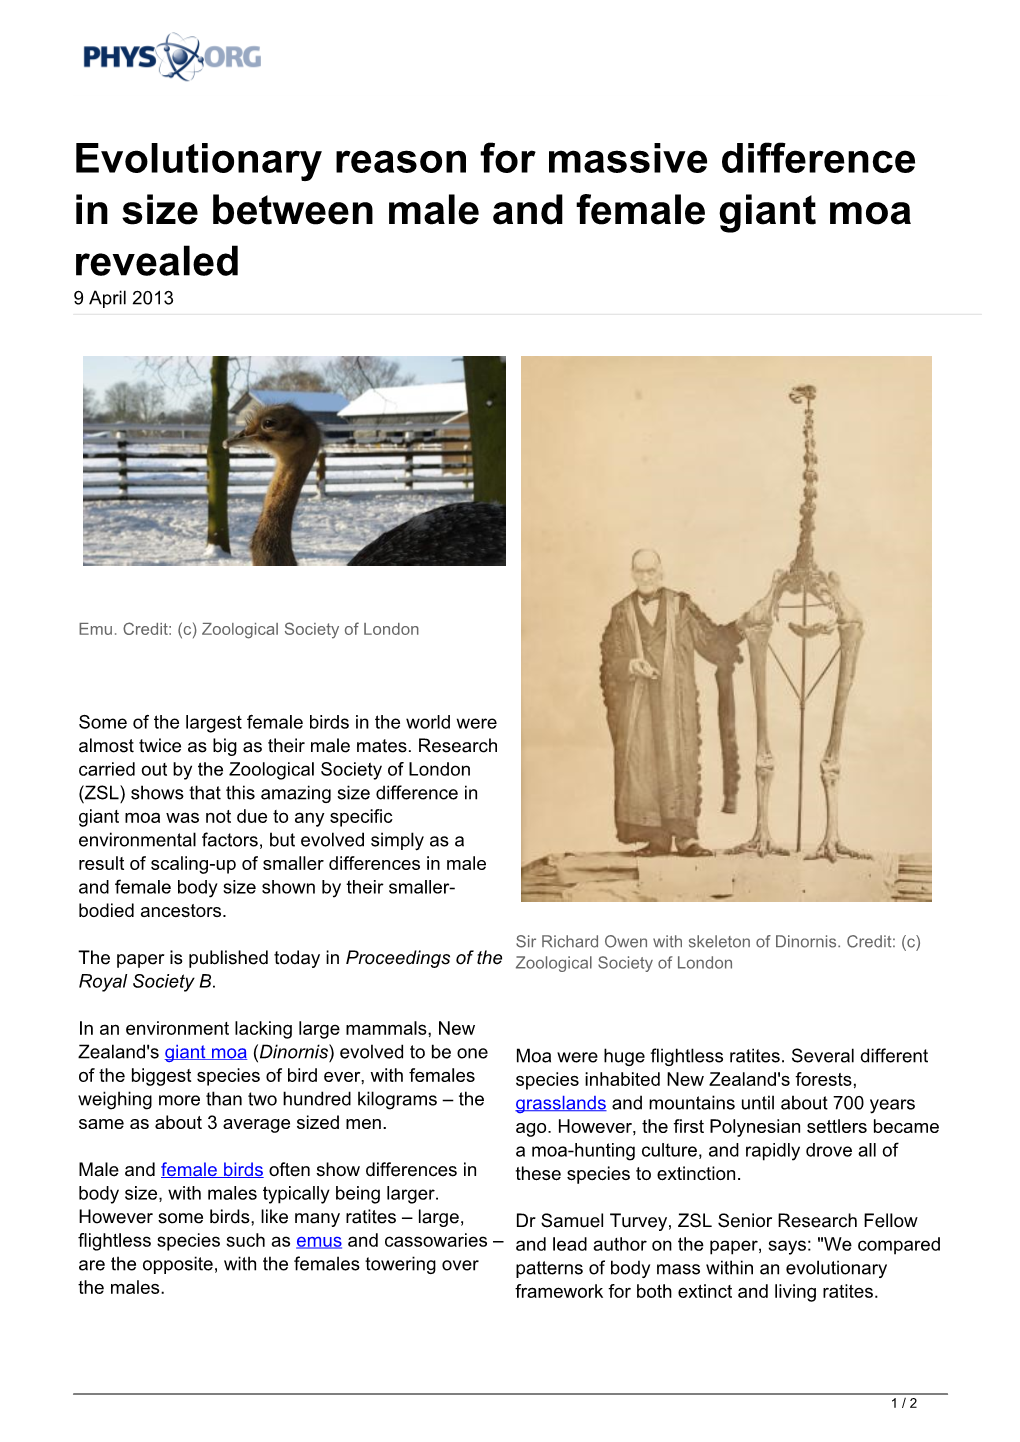 Evolutionary Reason for Massive Difference in Size Between Male and Female Giant Moa Revealed 9 April 2013